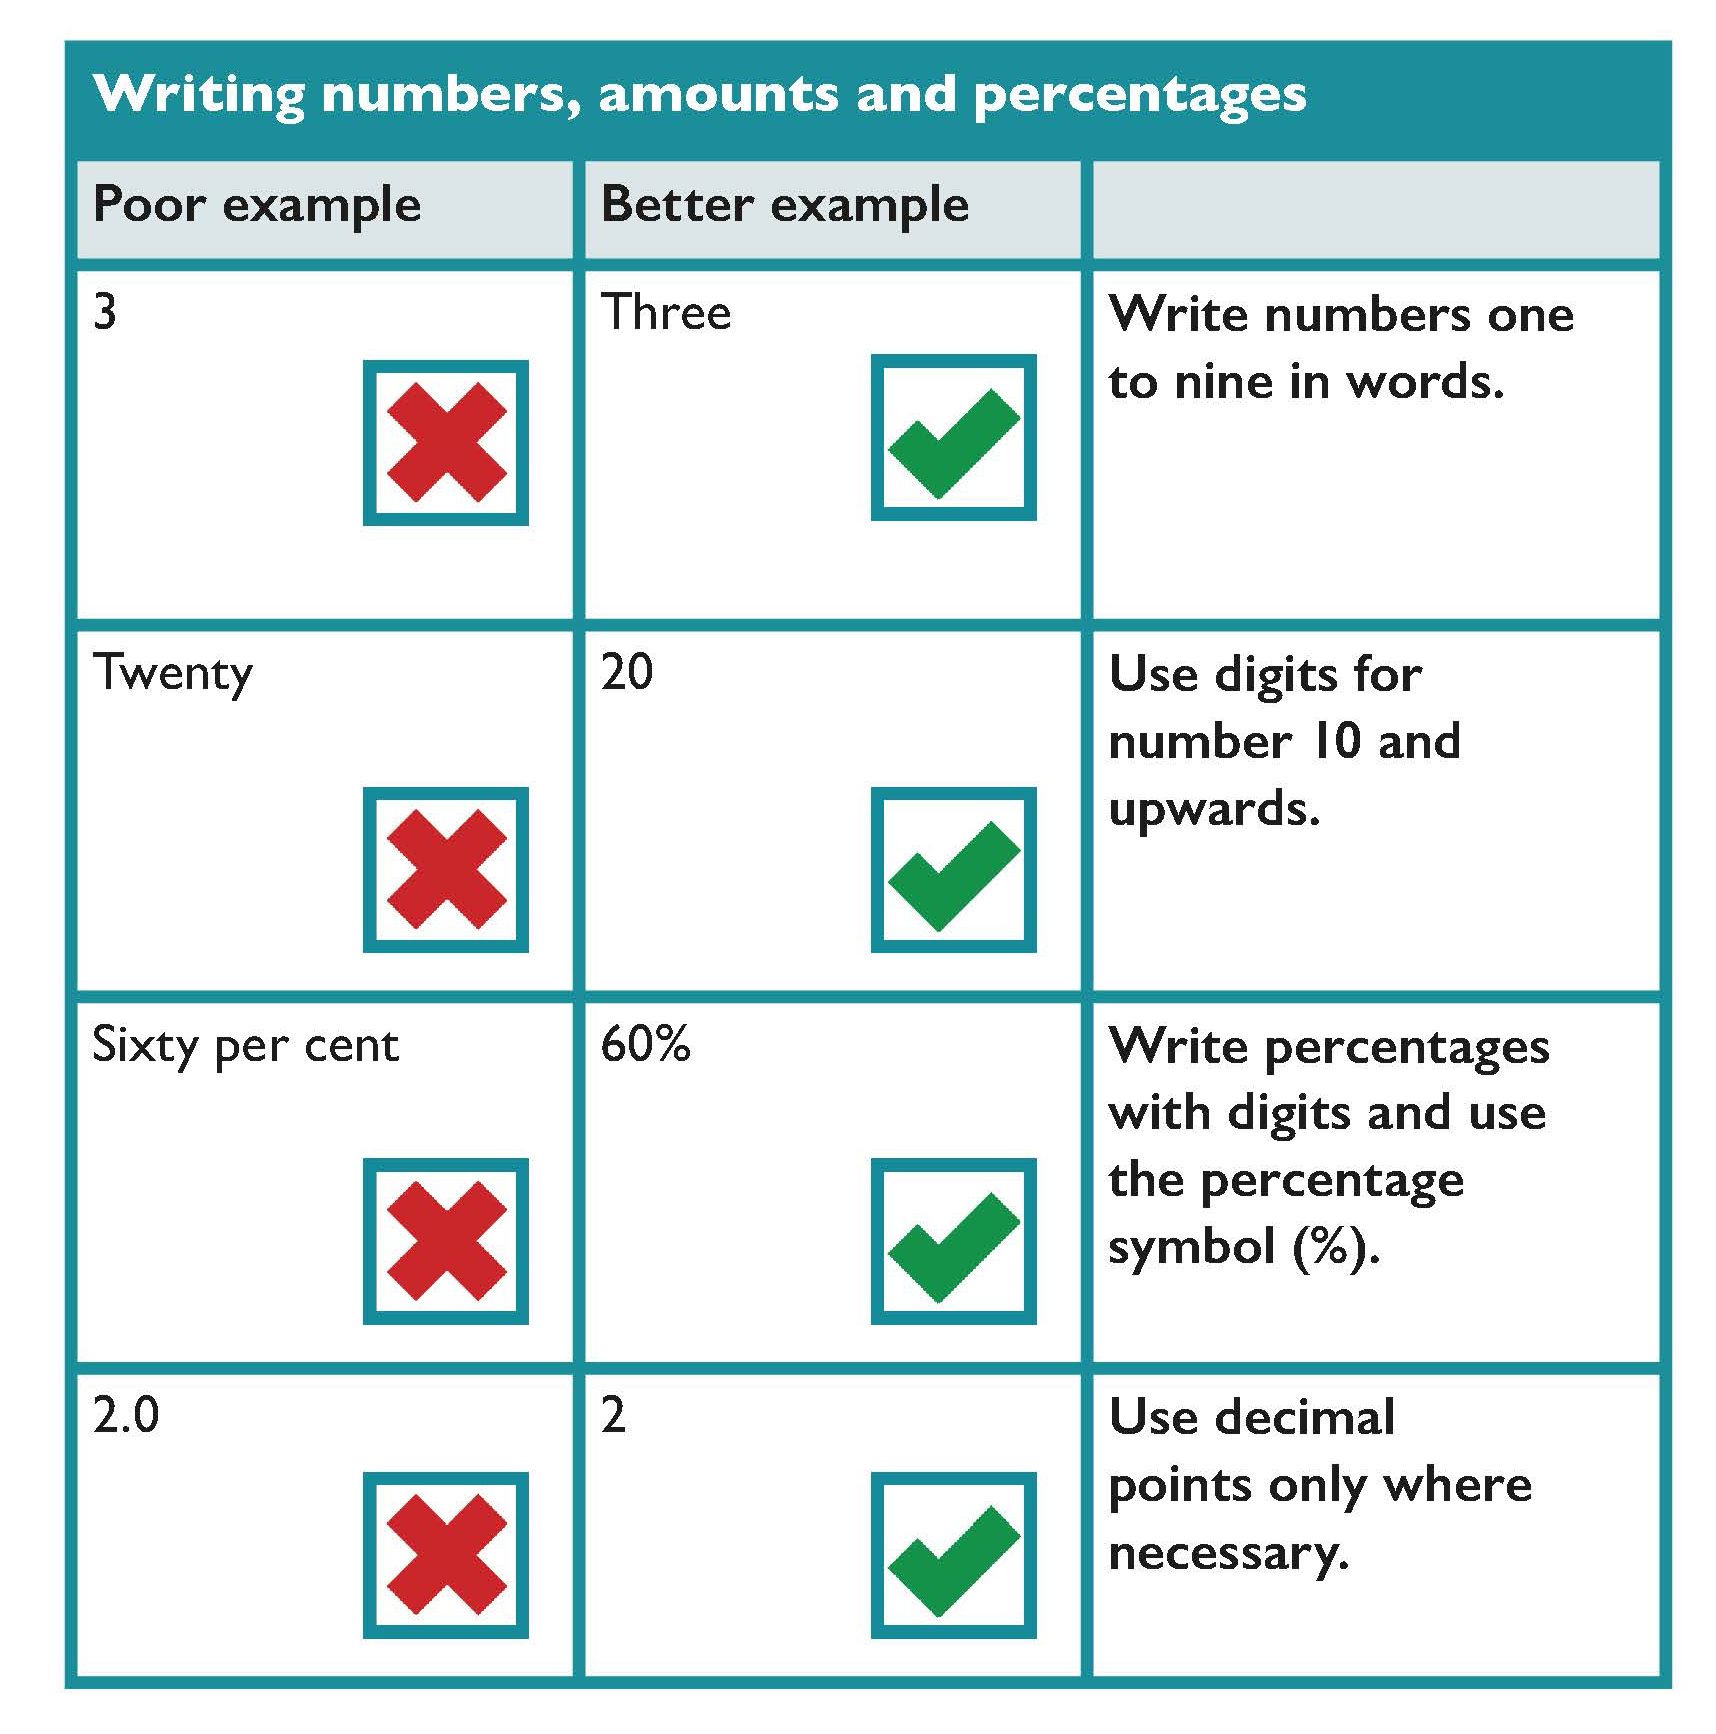 Examples of how to write numbers amounts and percentages